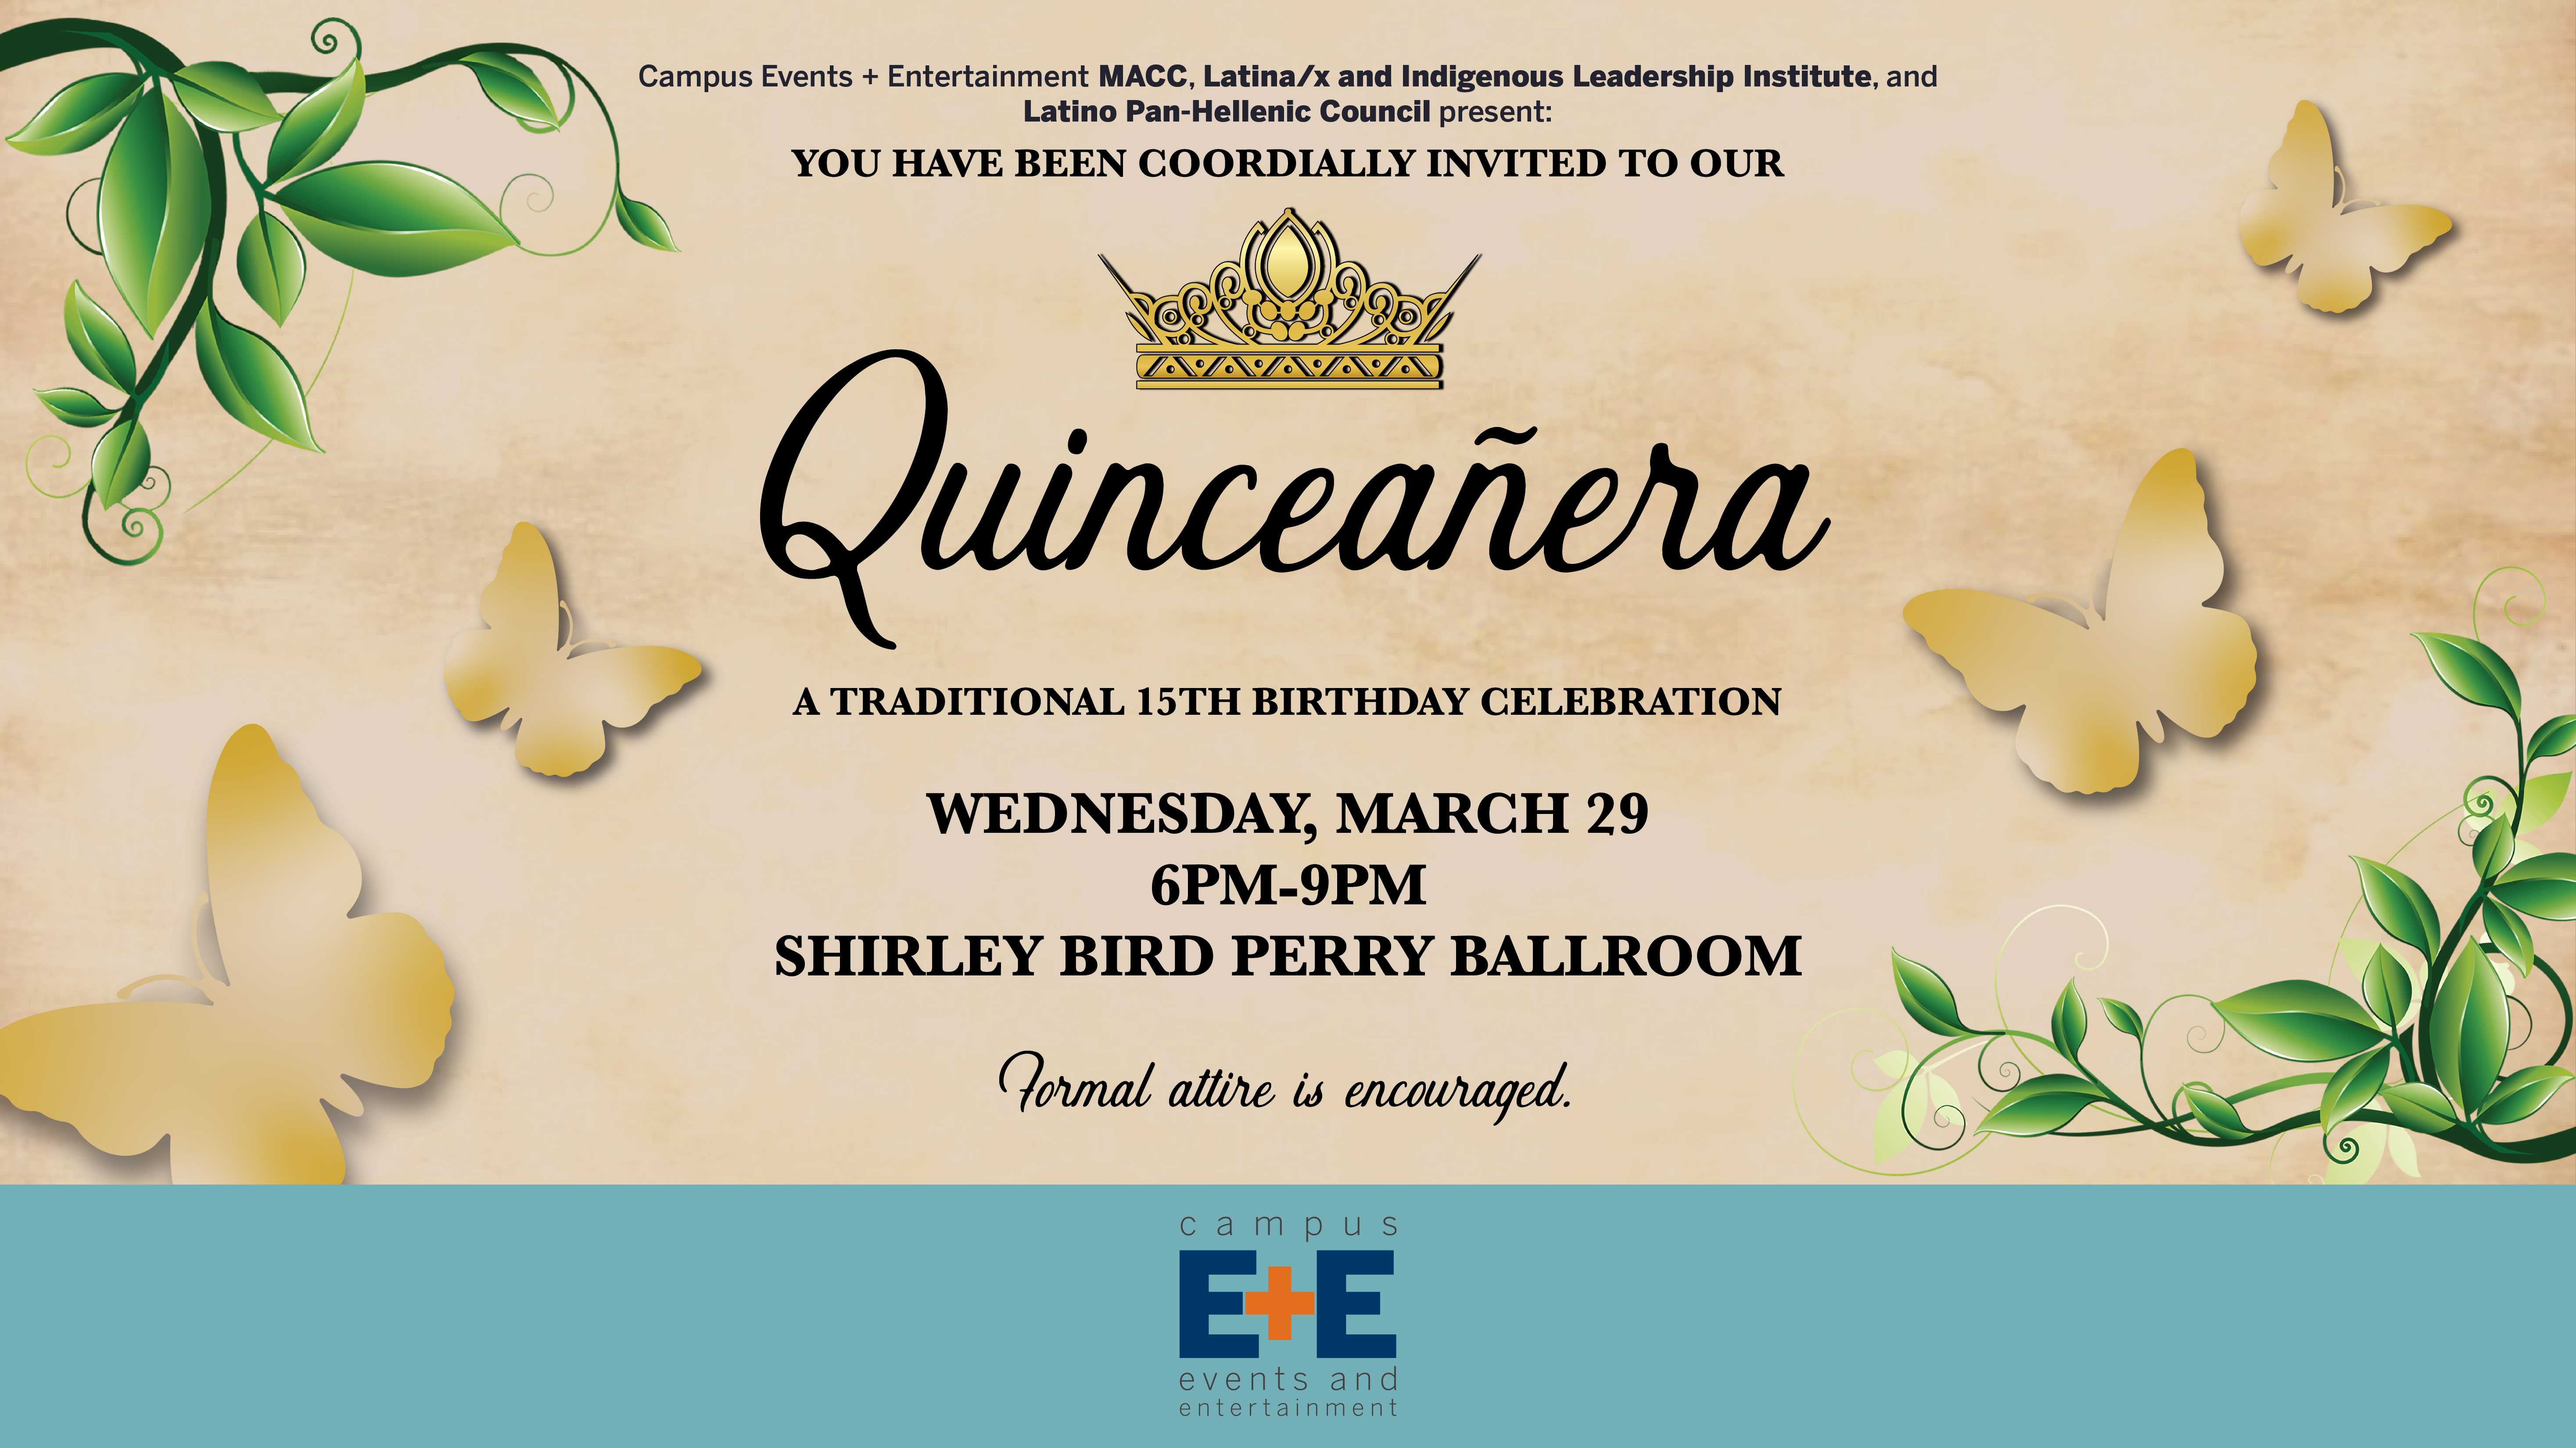 Quinceanera written on tan background